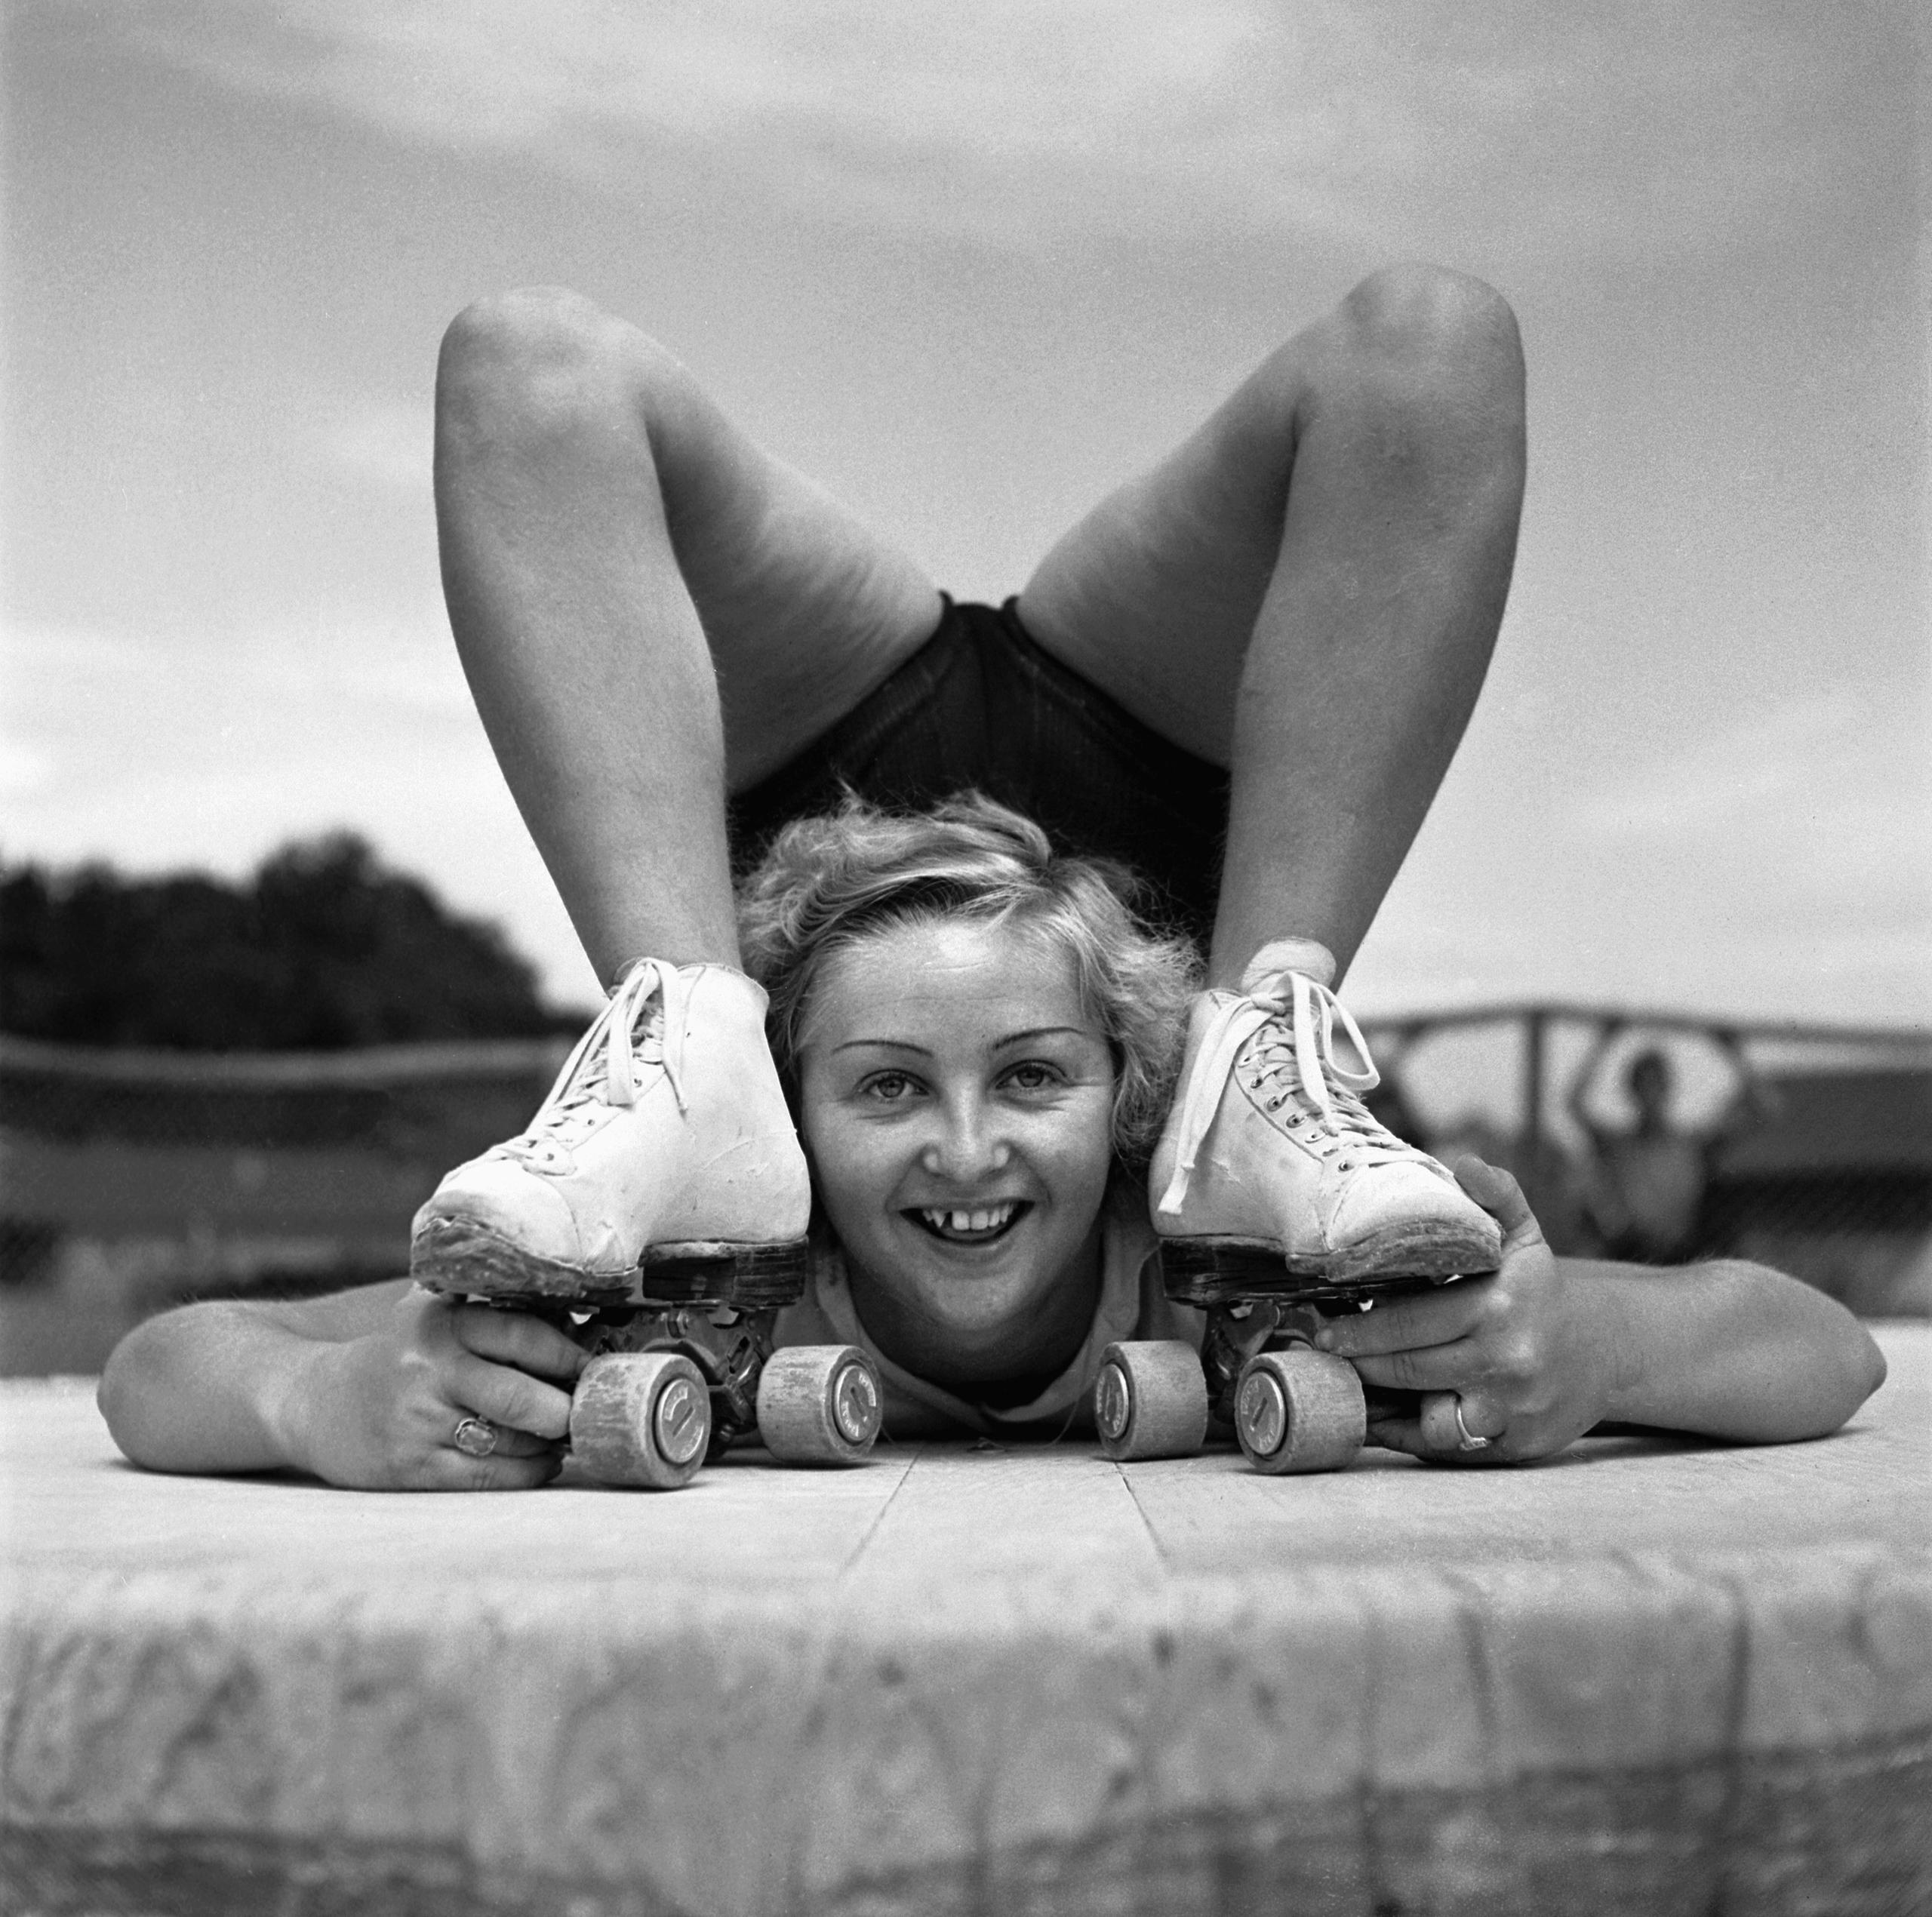 A contortionist on rollerskates